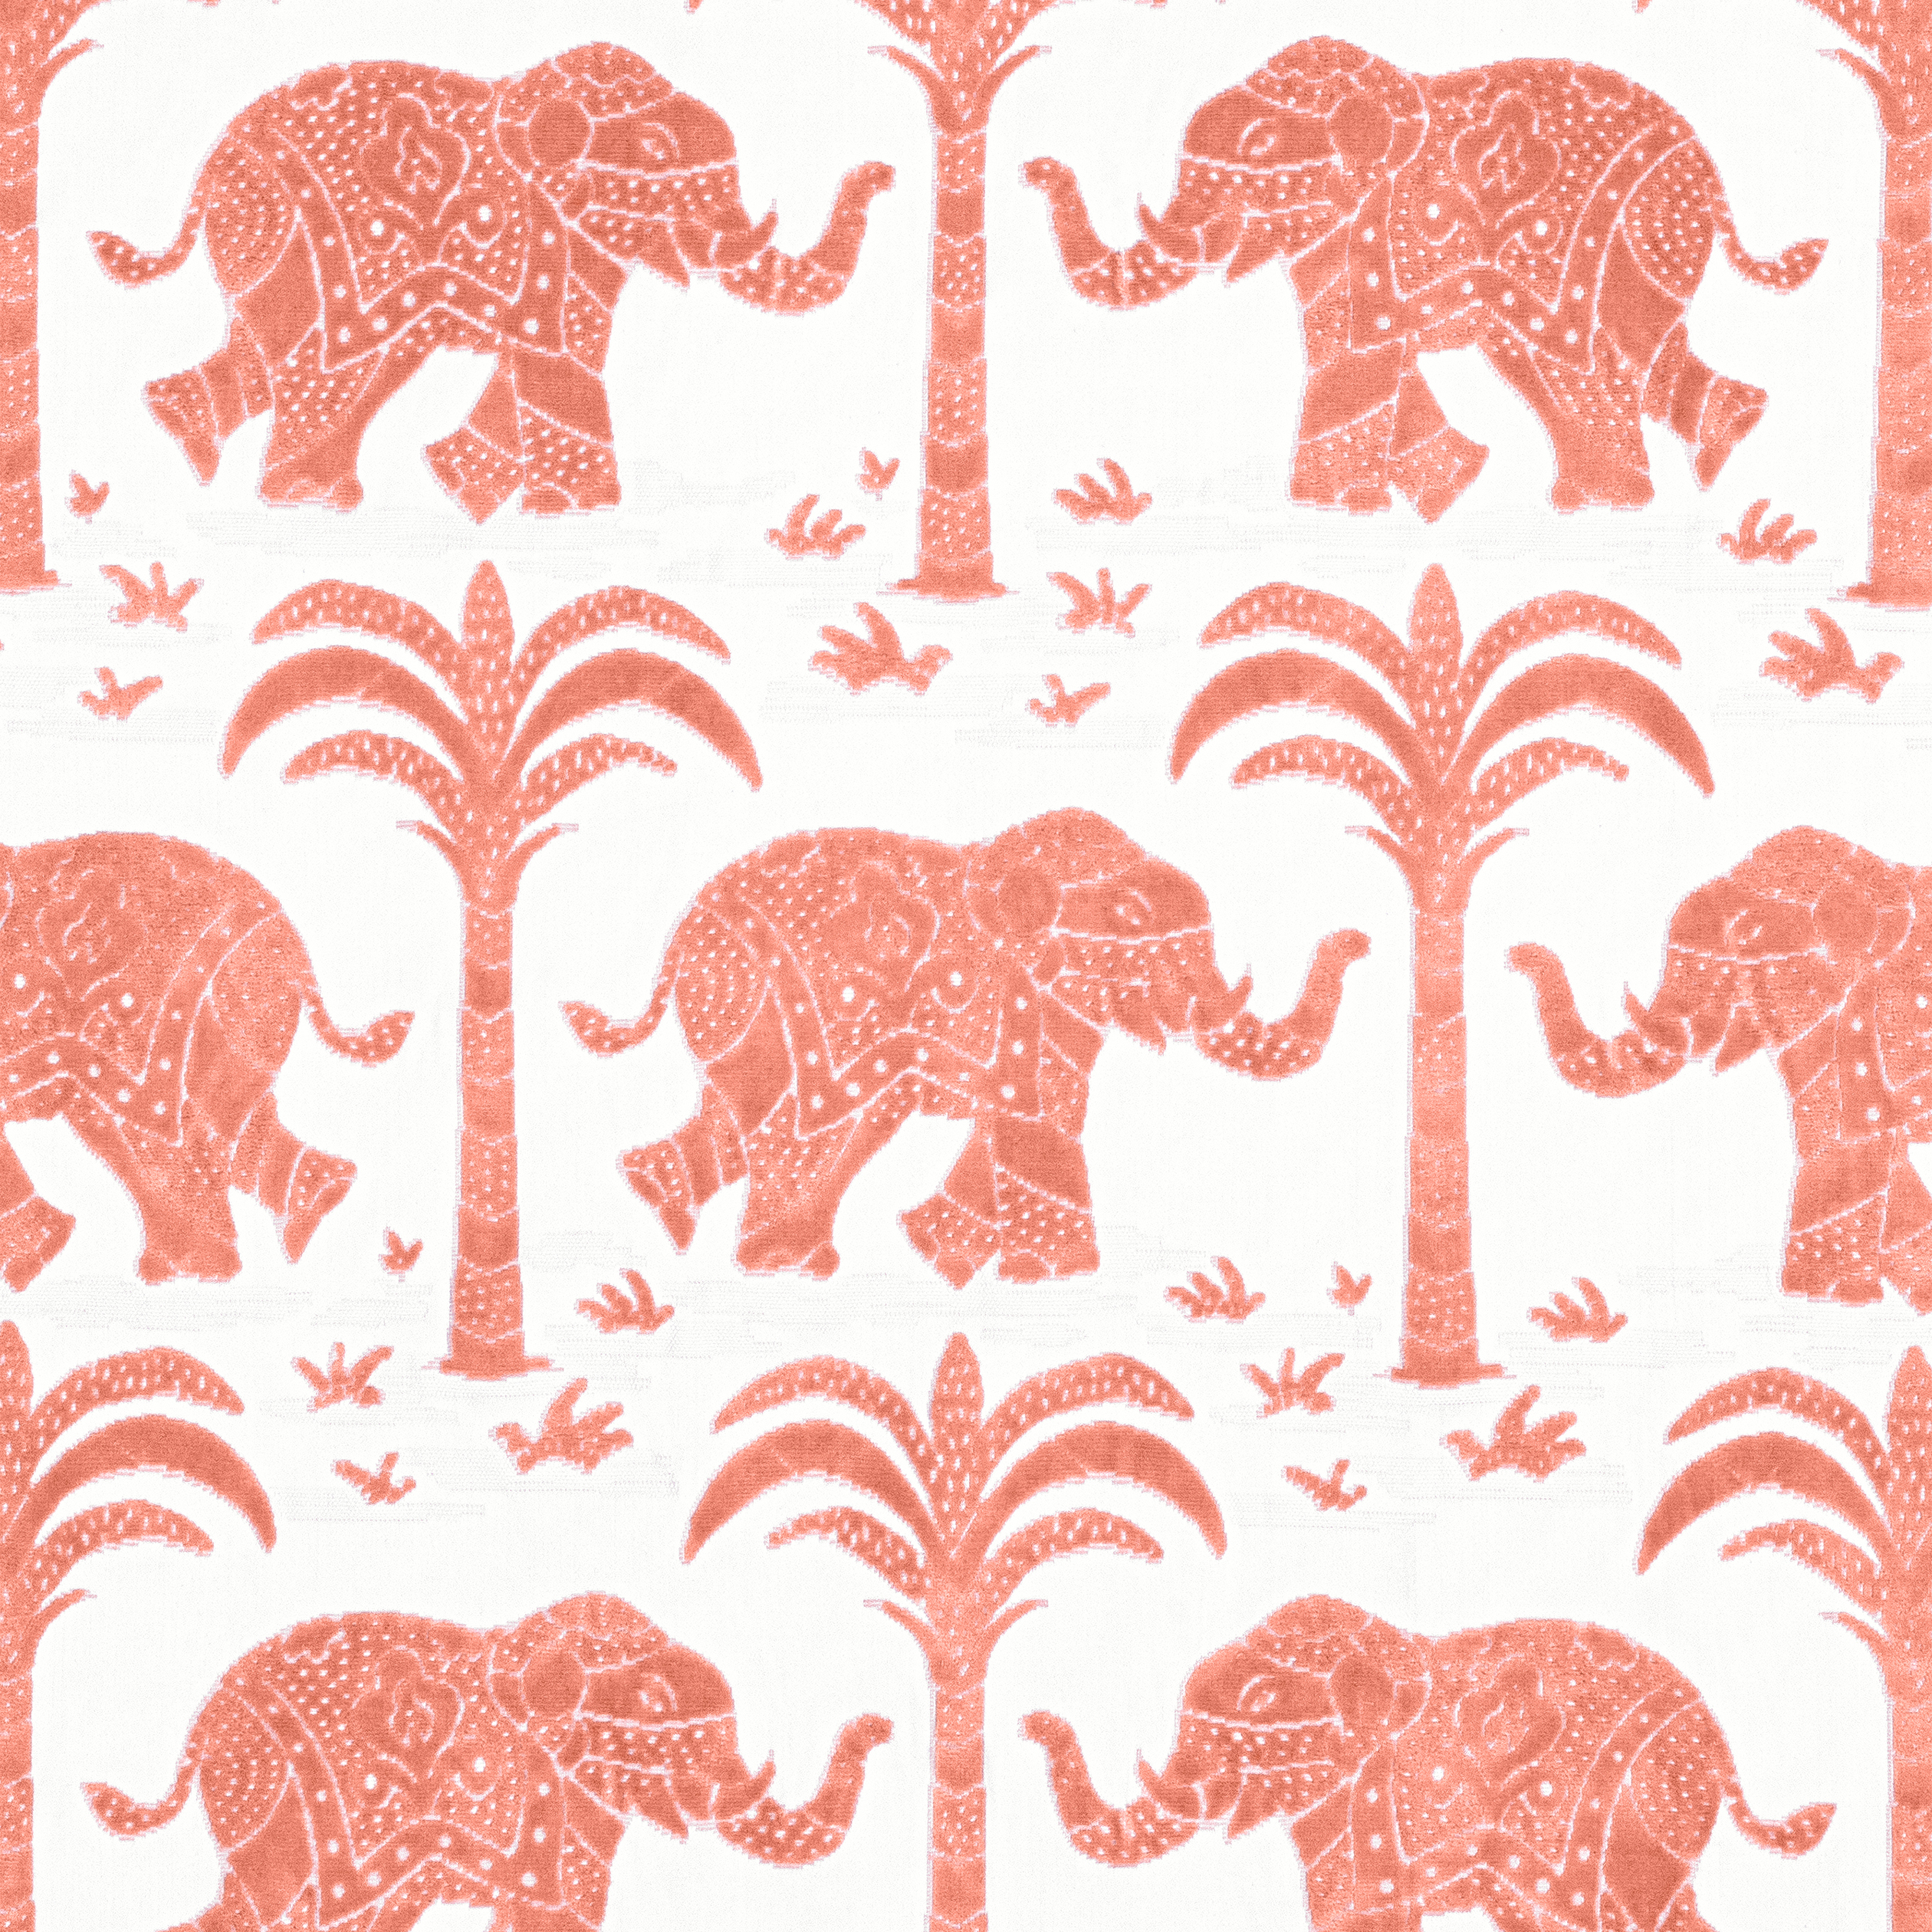 W716203 ELEPHANT VELVET Woven Fabrics Coral from the